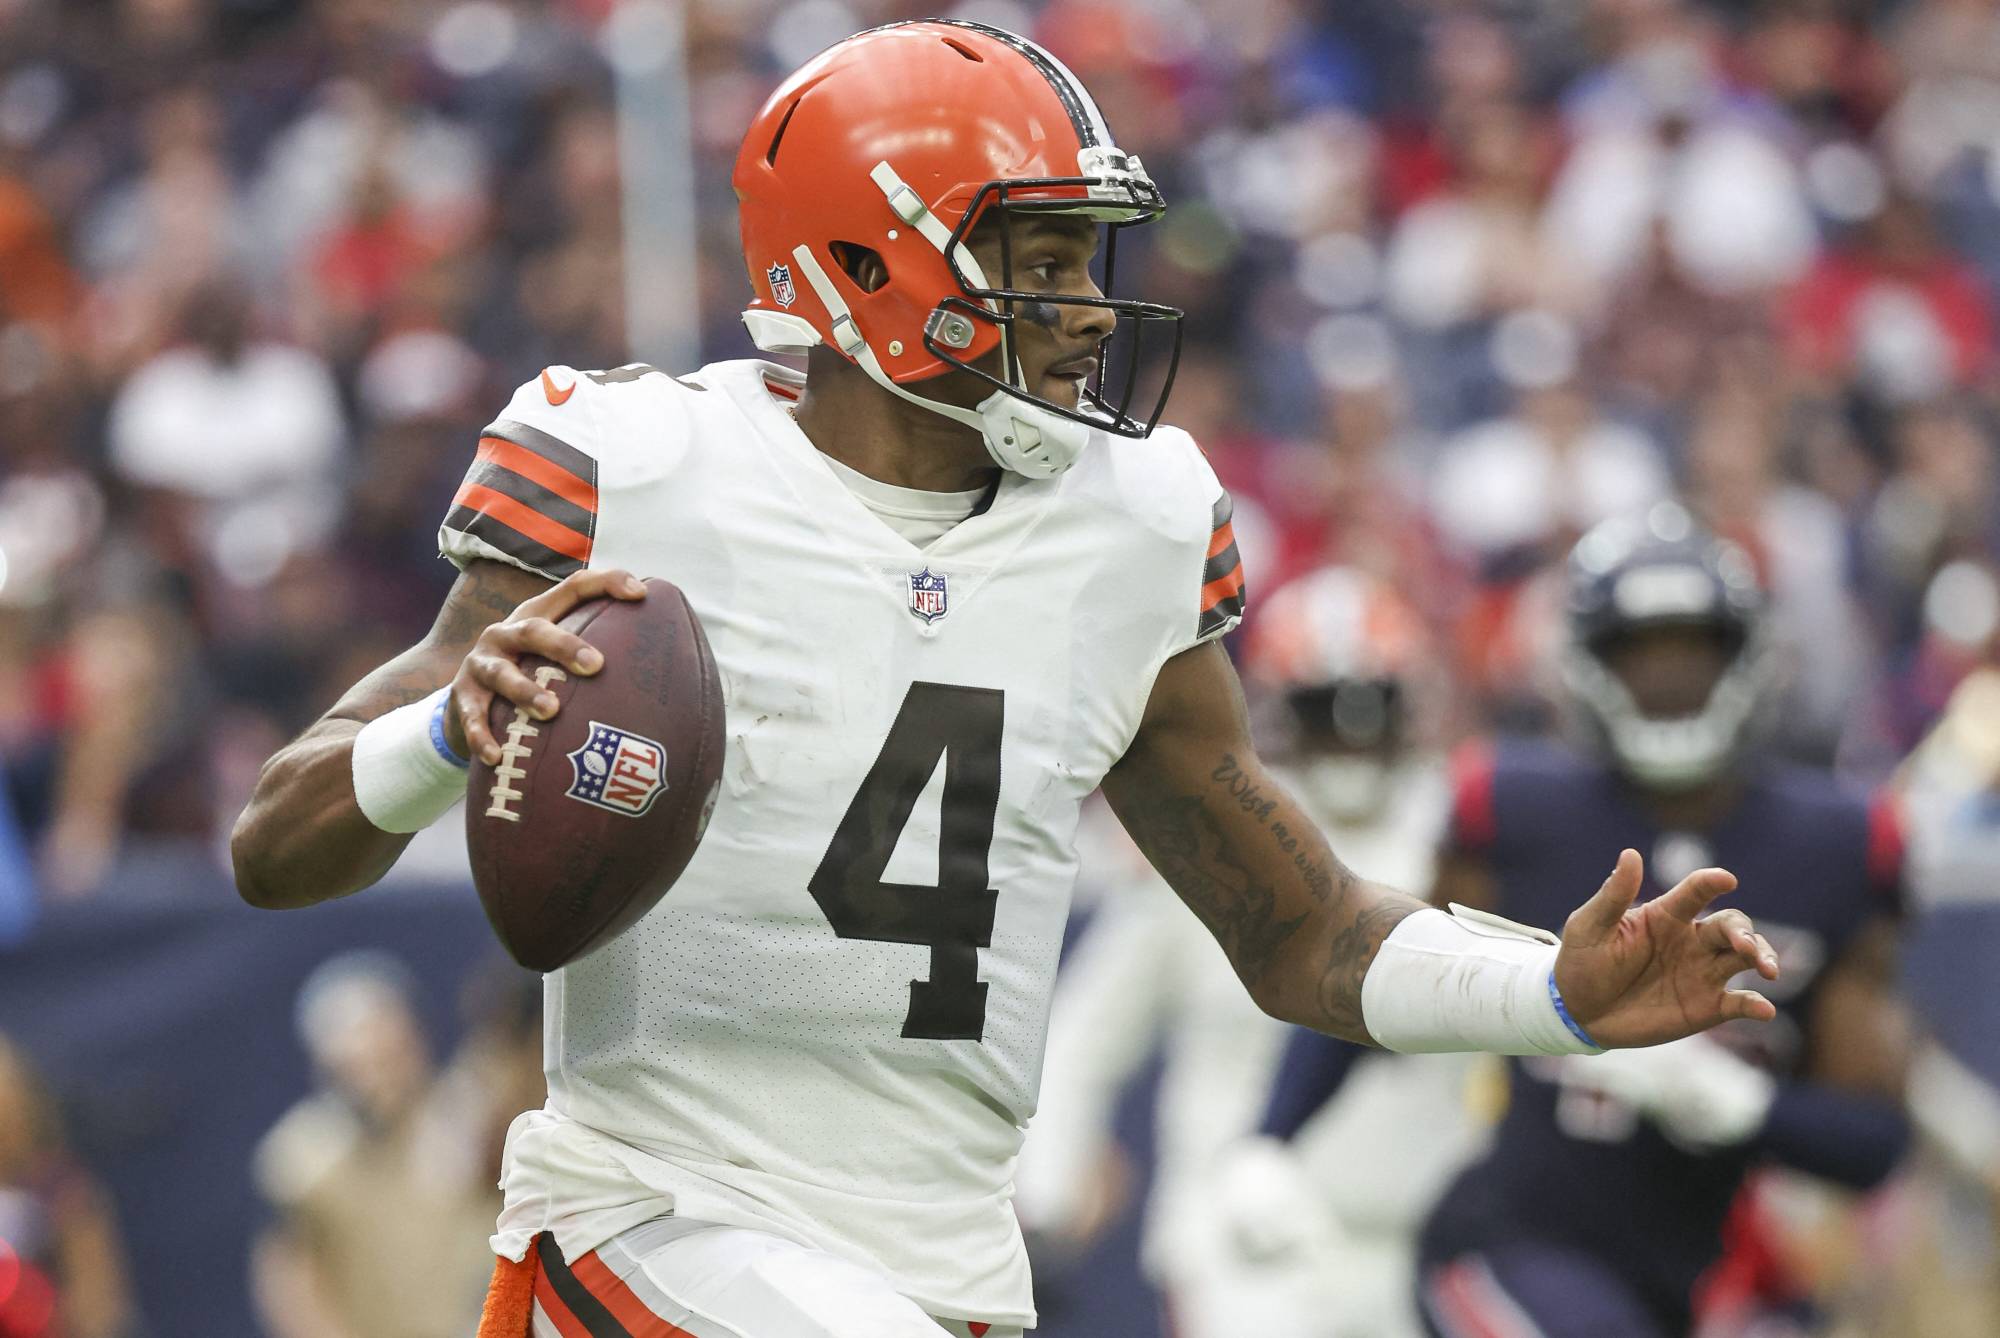 Rusty Deshaun Watson booed during unimpressive debut in Browns victory -  The Japan Times